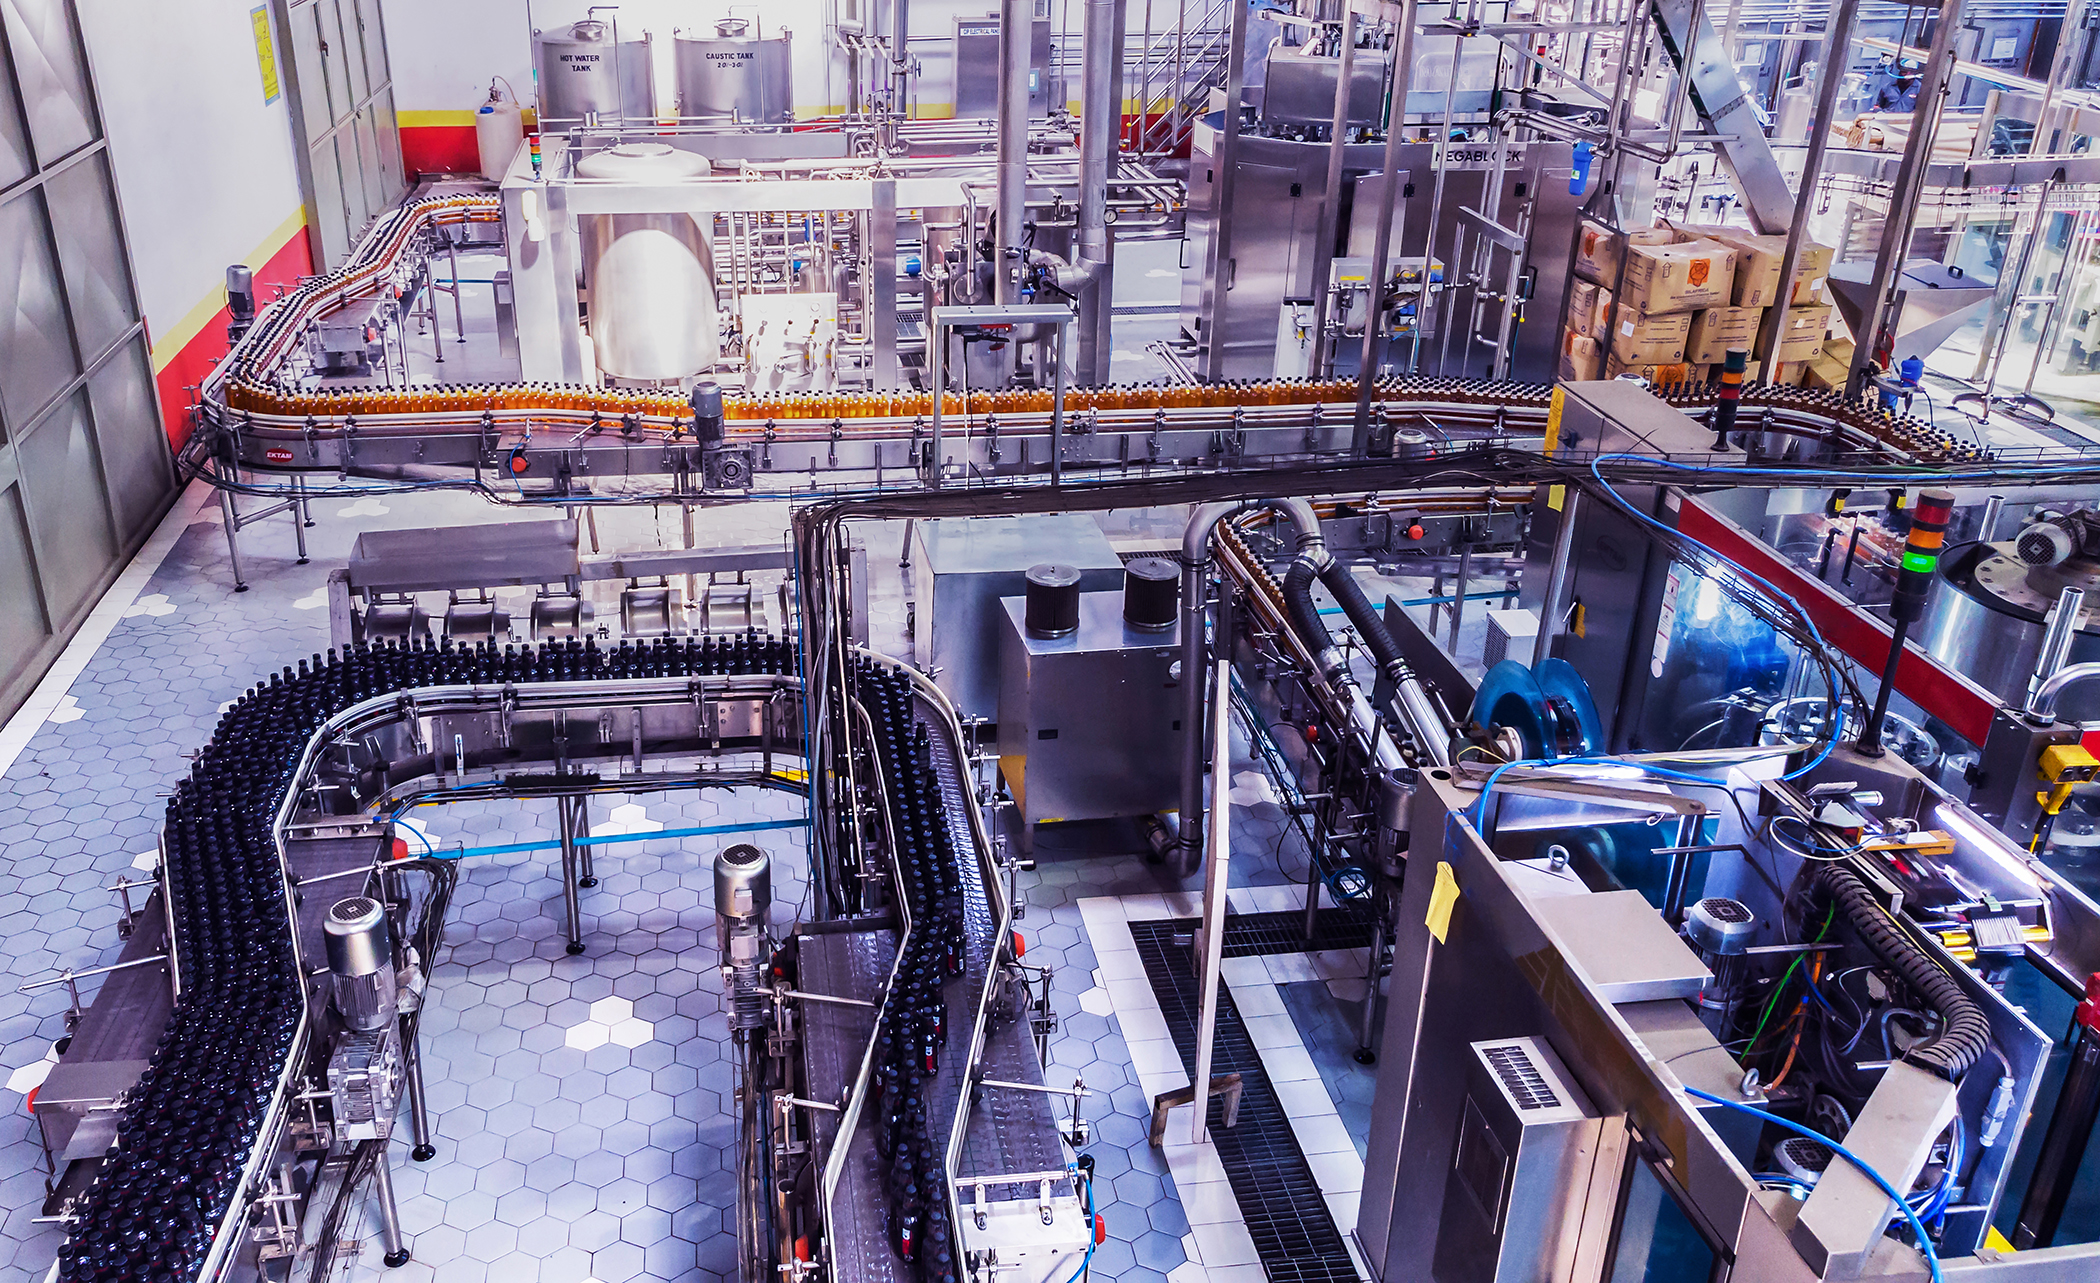 The Connected Industries of the future are highly productive, flexible and responsive because of their ability to leverage the power of data, which can offer a unique understanding of what is happening on the factory floor in real-time(©istock/ GCShutter)